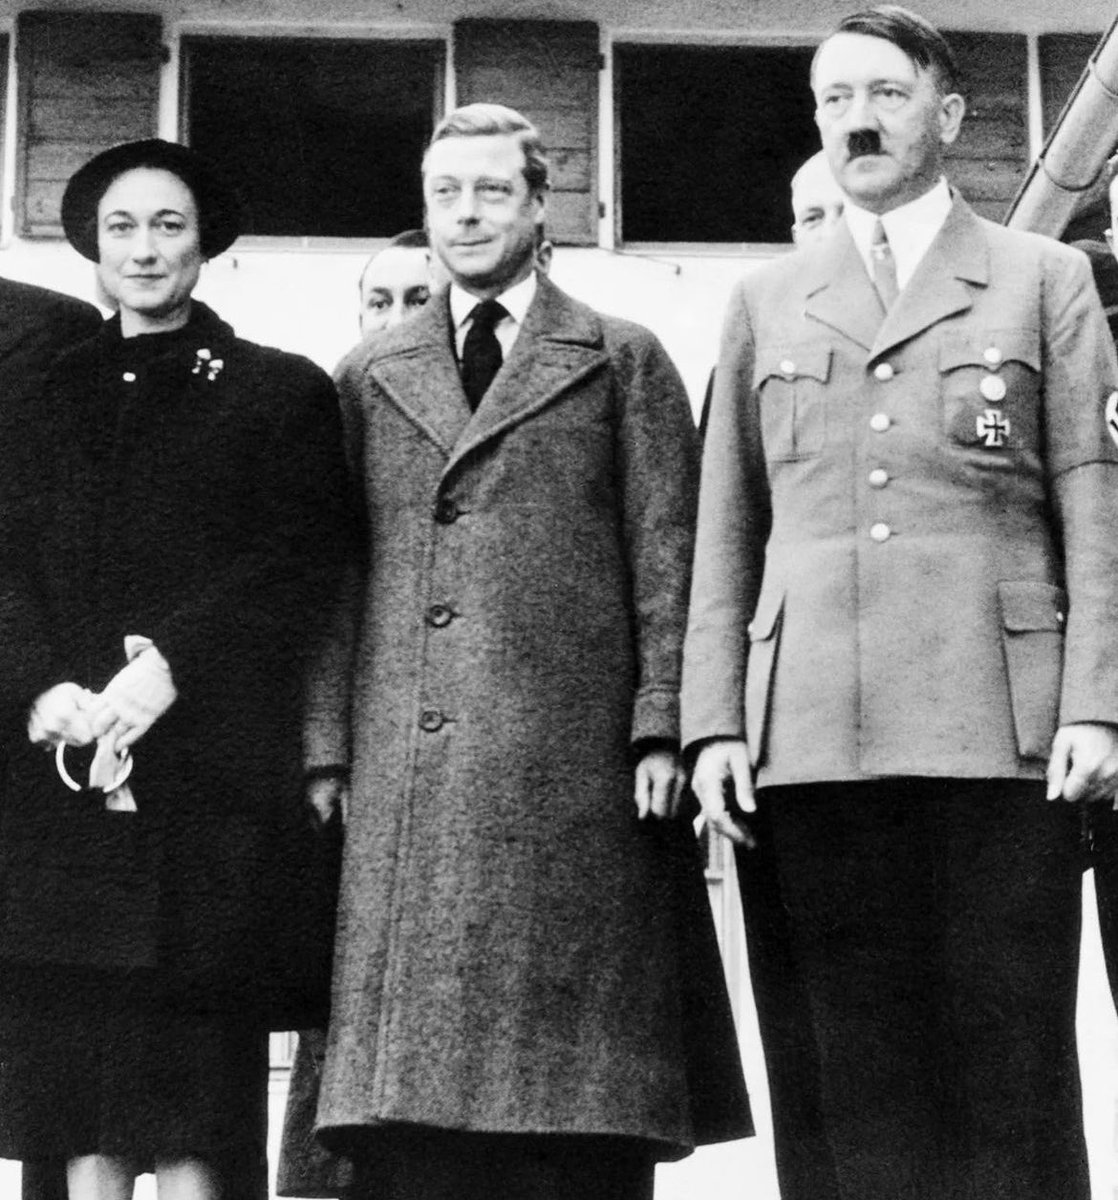 In 1937, Edward VIII, the former King of the United Kingdom, paid a visit to Nazi Germany. Edward had abdicated the British throne in December 1936, allowing his brother George VI to ascend as the new king. Following his abdication, Edward was bestowed with the title Duke of…